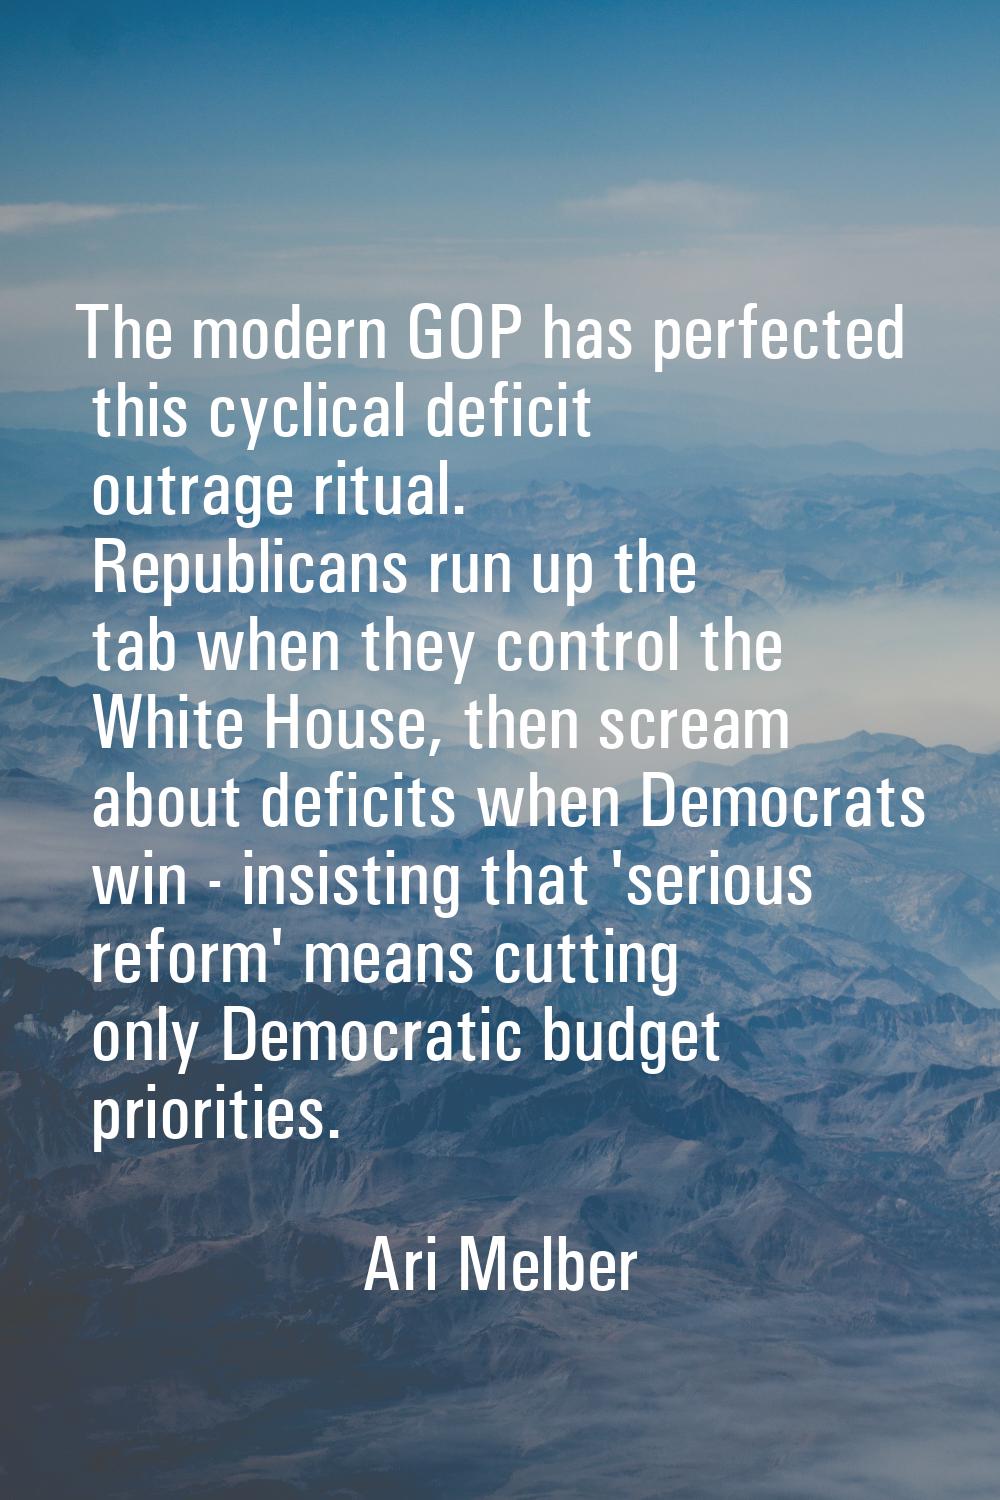 The modern GOP has perfected this cyclical deficit outrage ritual. Republicans run up the tab when 